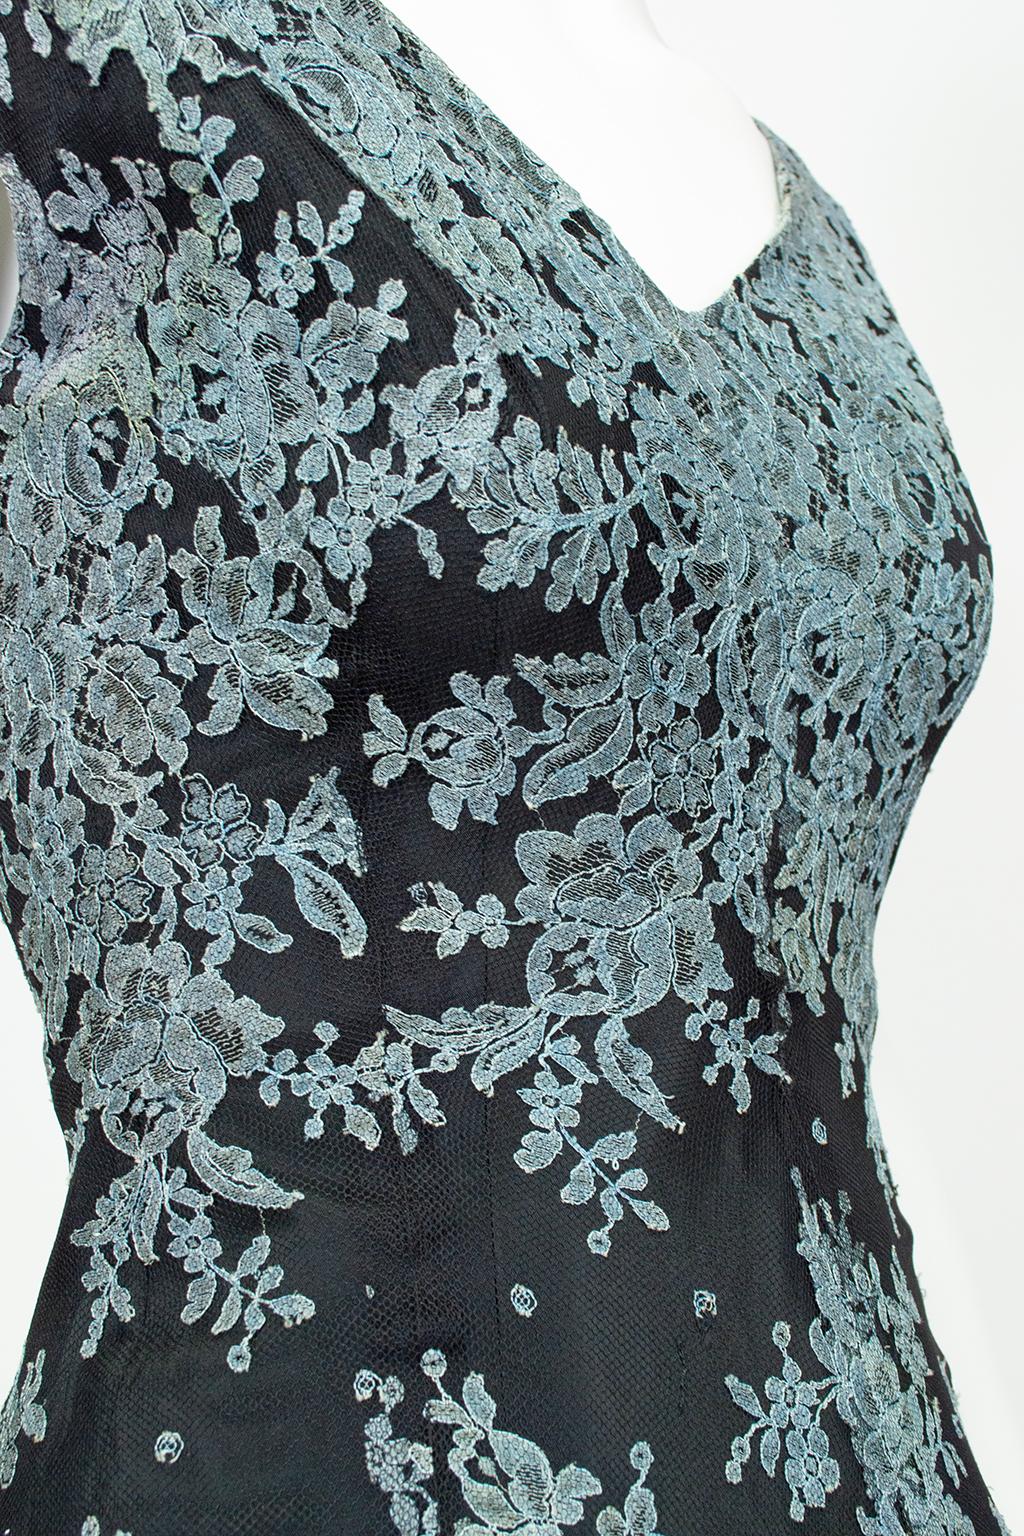 Bespoke Spanish Blue and Black Lace Mantilla Drop Waist Party Dress – XS, 1950s For Sale 1